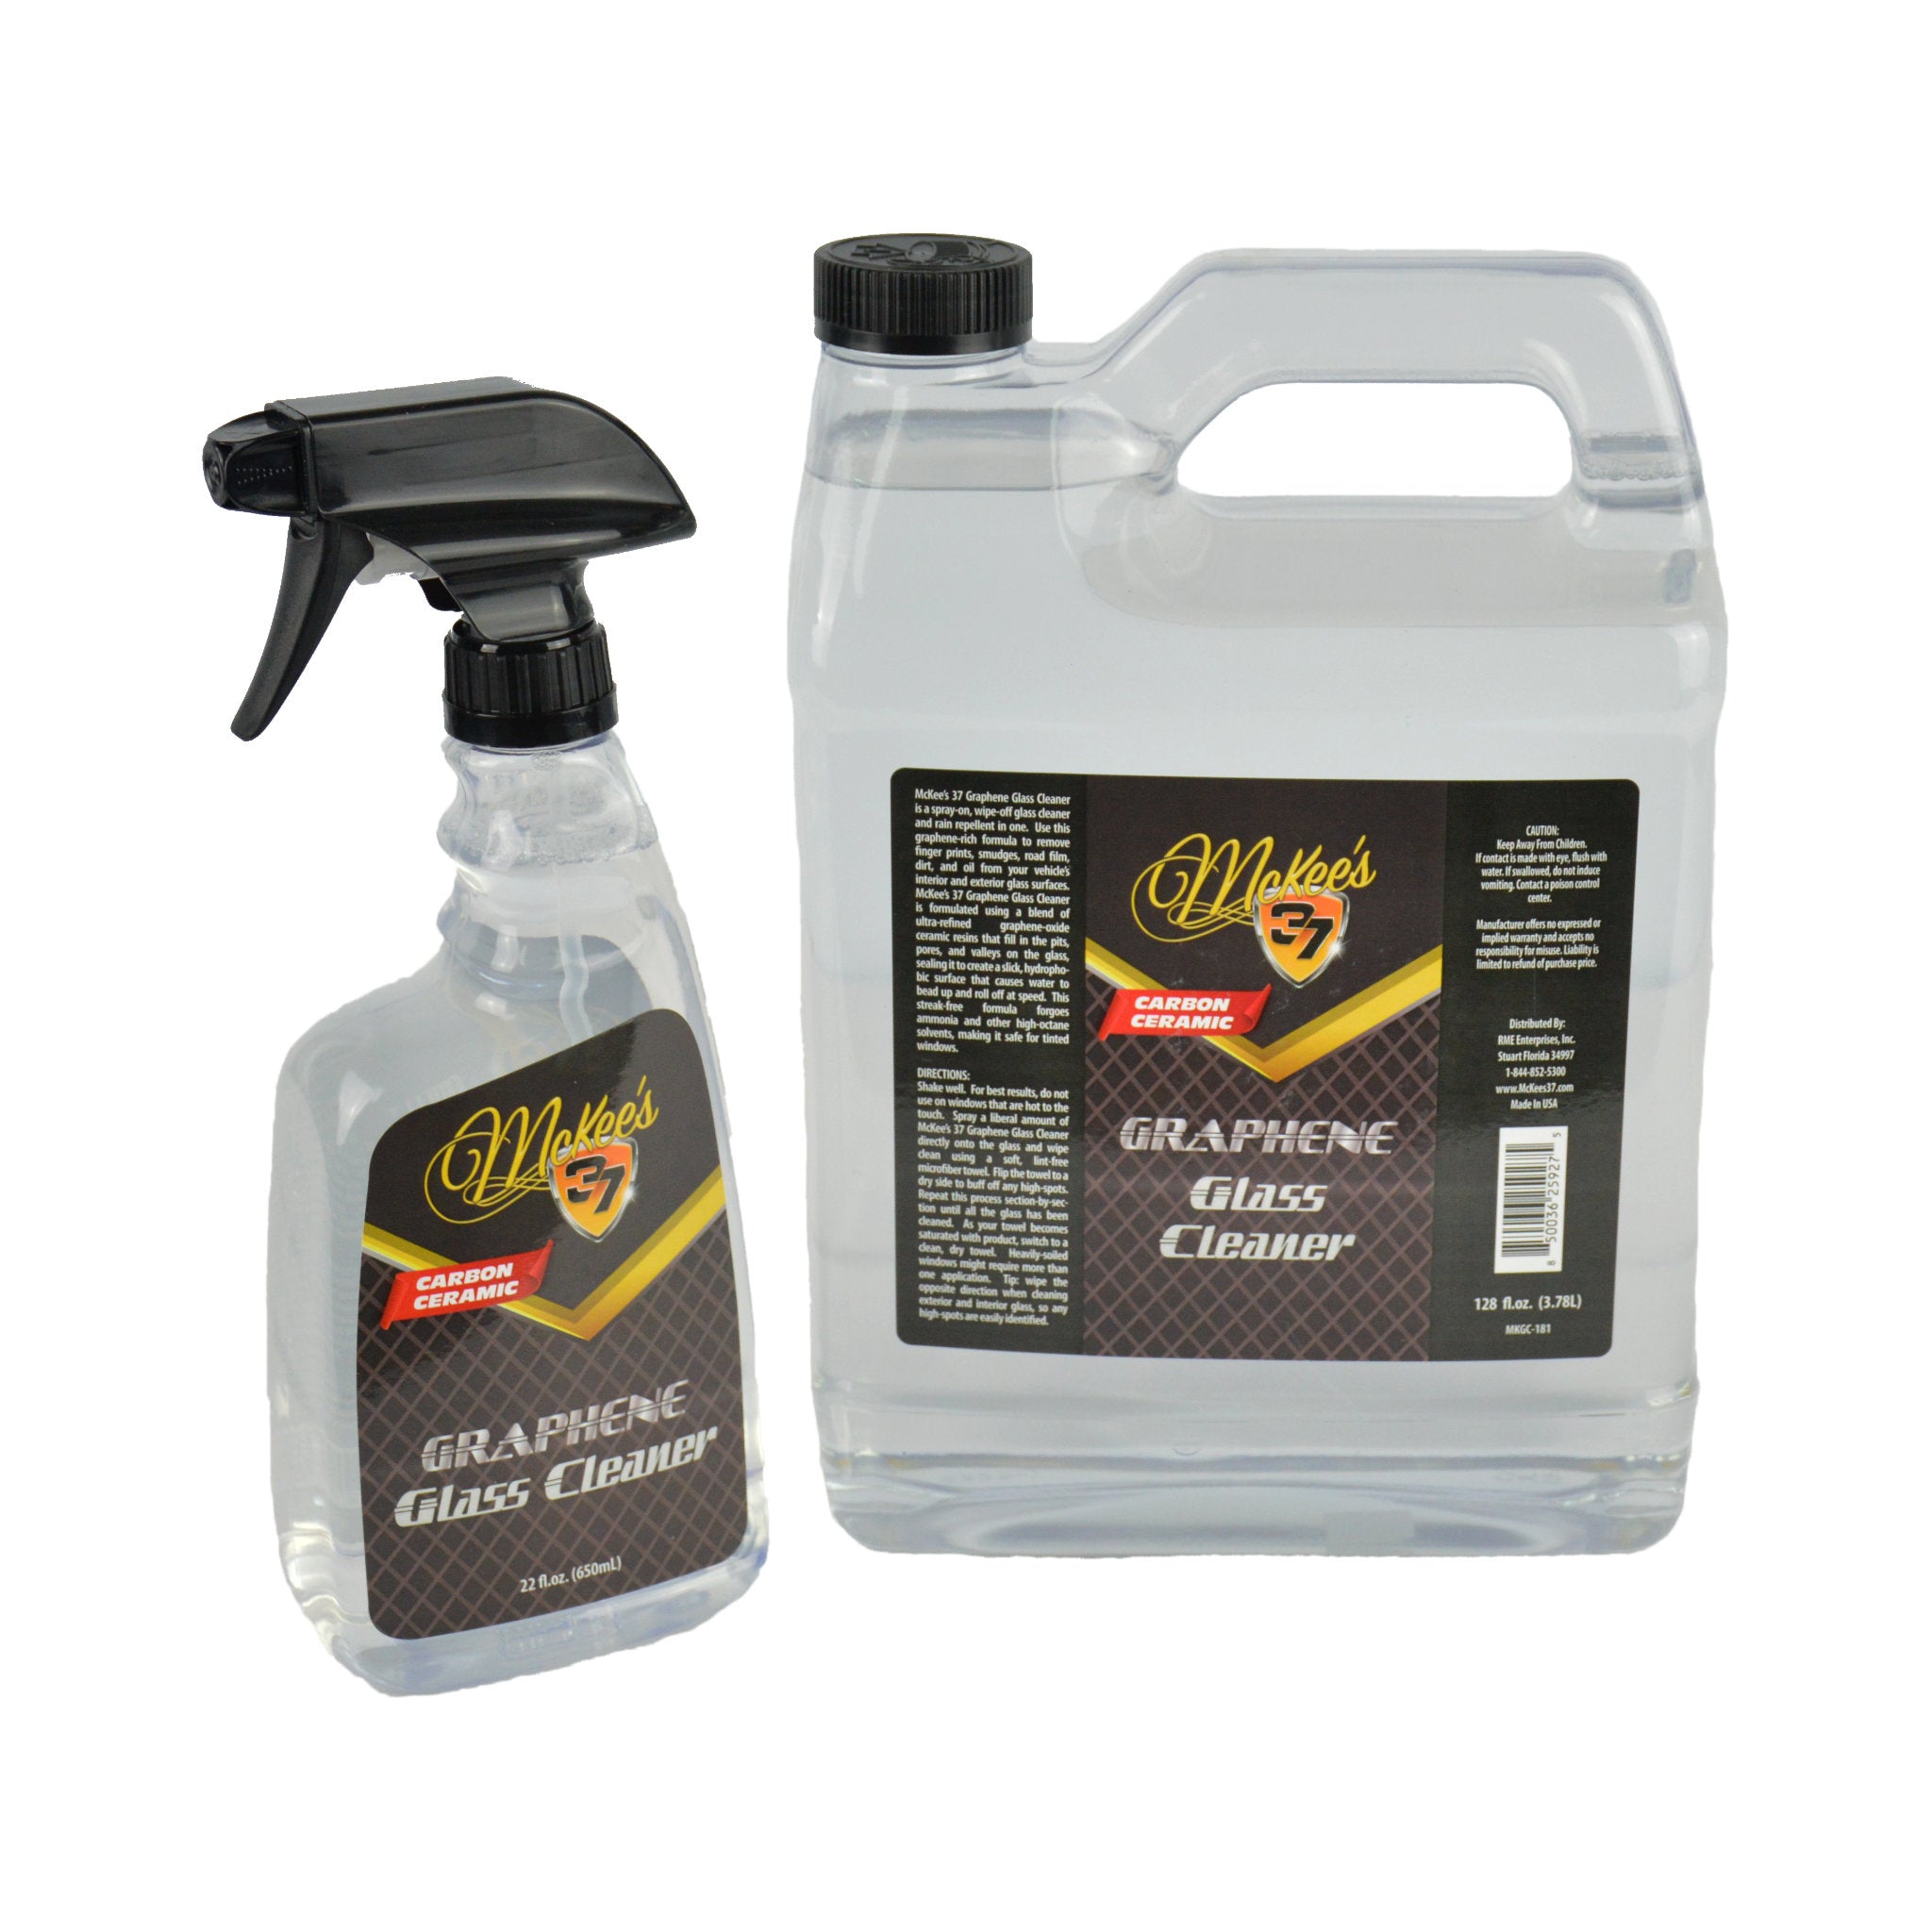 Glean Glass Polishing Compound is formulated to Remove Acidrain